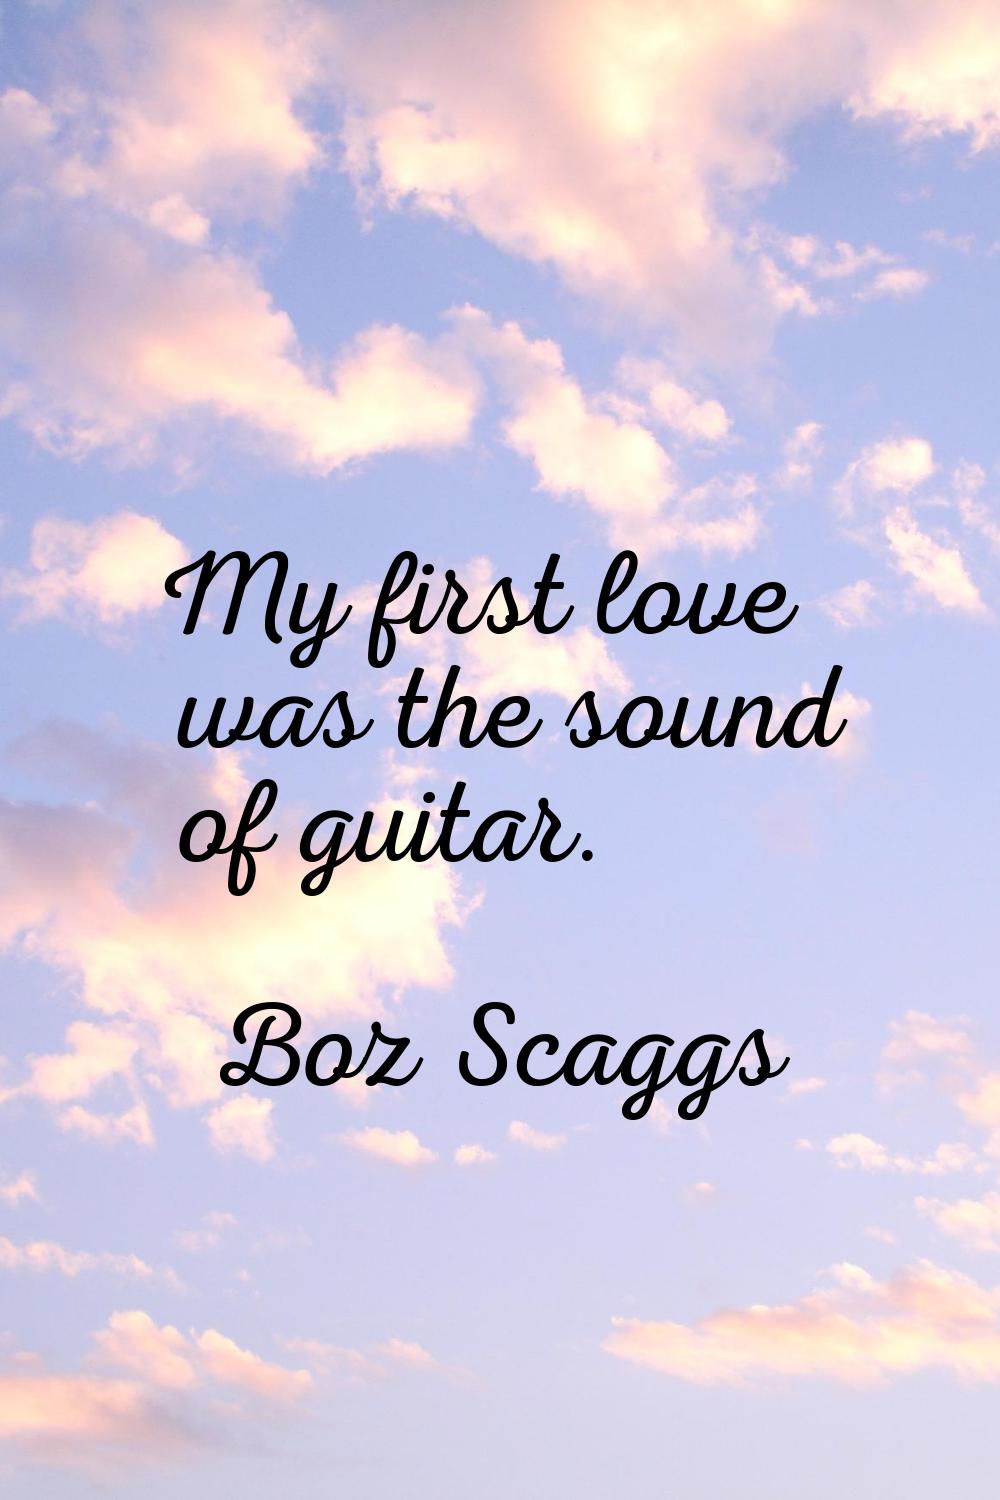 My first love was the sound of guitar.